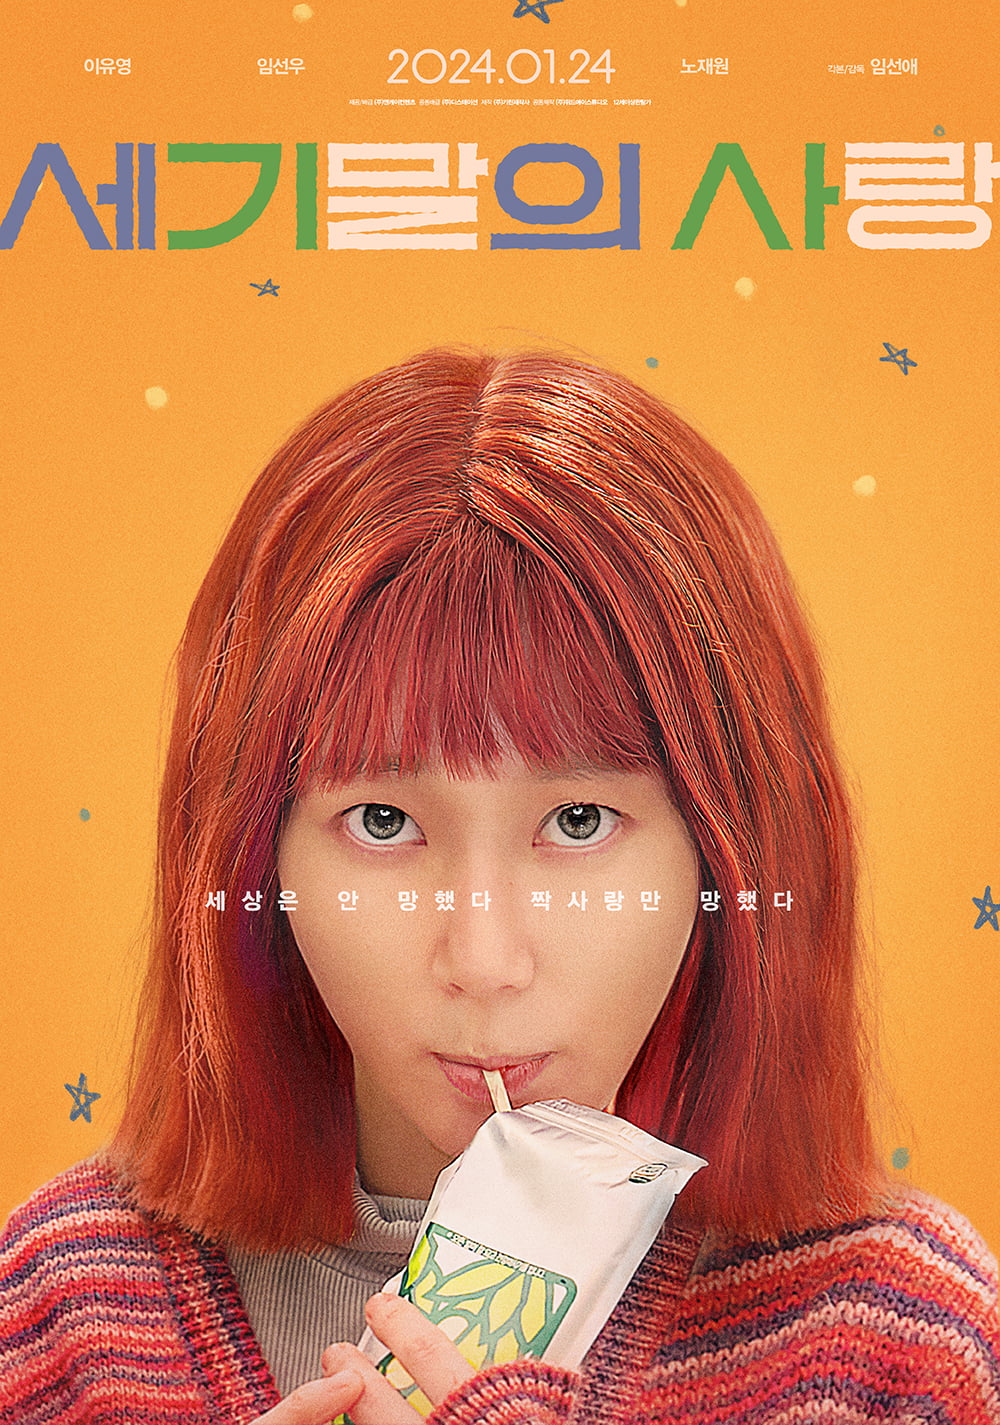 The movie ‘Ms. ‘Apocalypse’ director Lim Seon-ae, “A story about learning the courage not to hate”